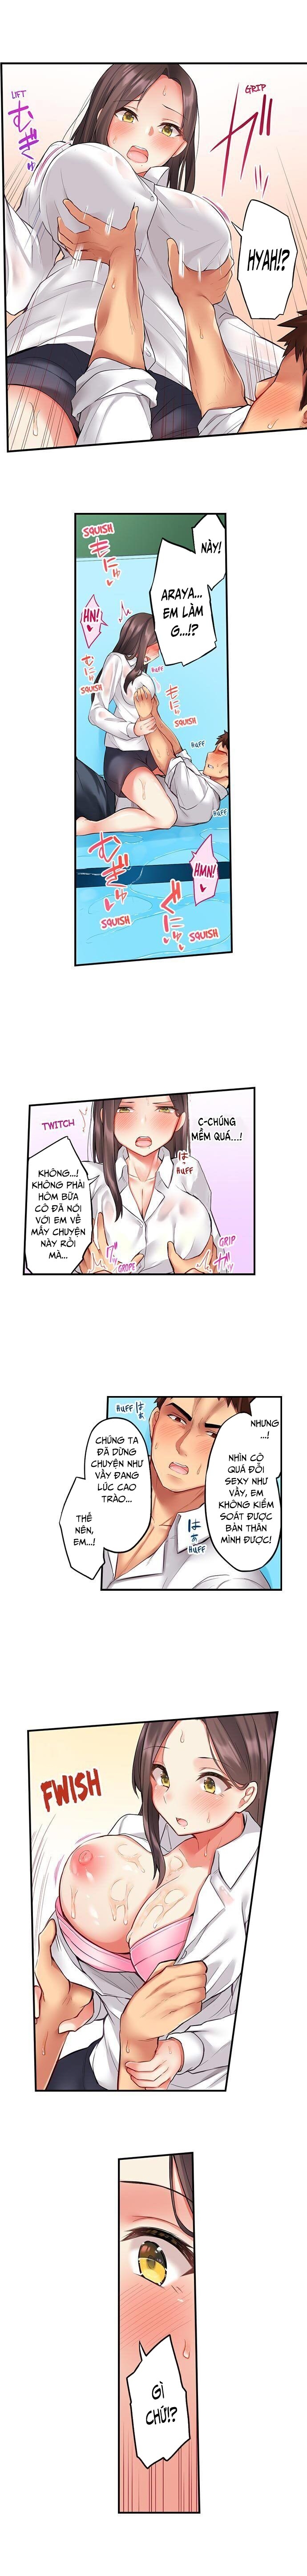 Xem ảnh If I See Your Boobs, There’s No Way I Won’t Lick Them - Chapter 5 - 1624033682891_0 - Hentai24h.Tv